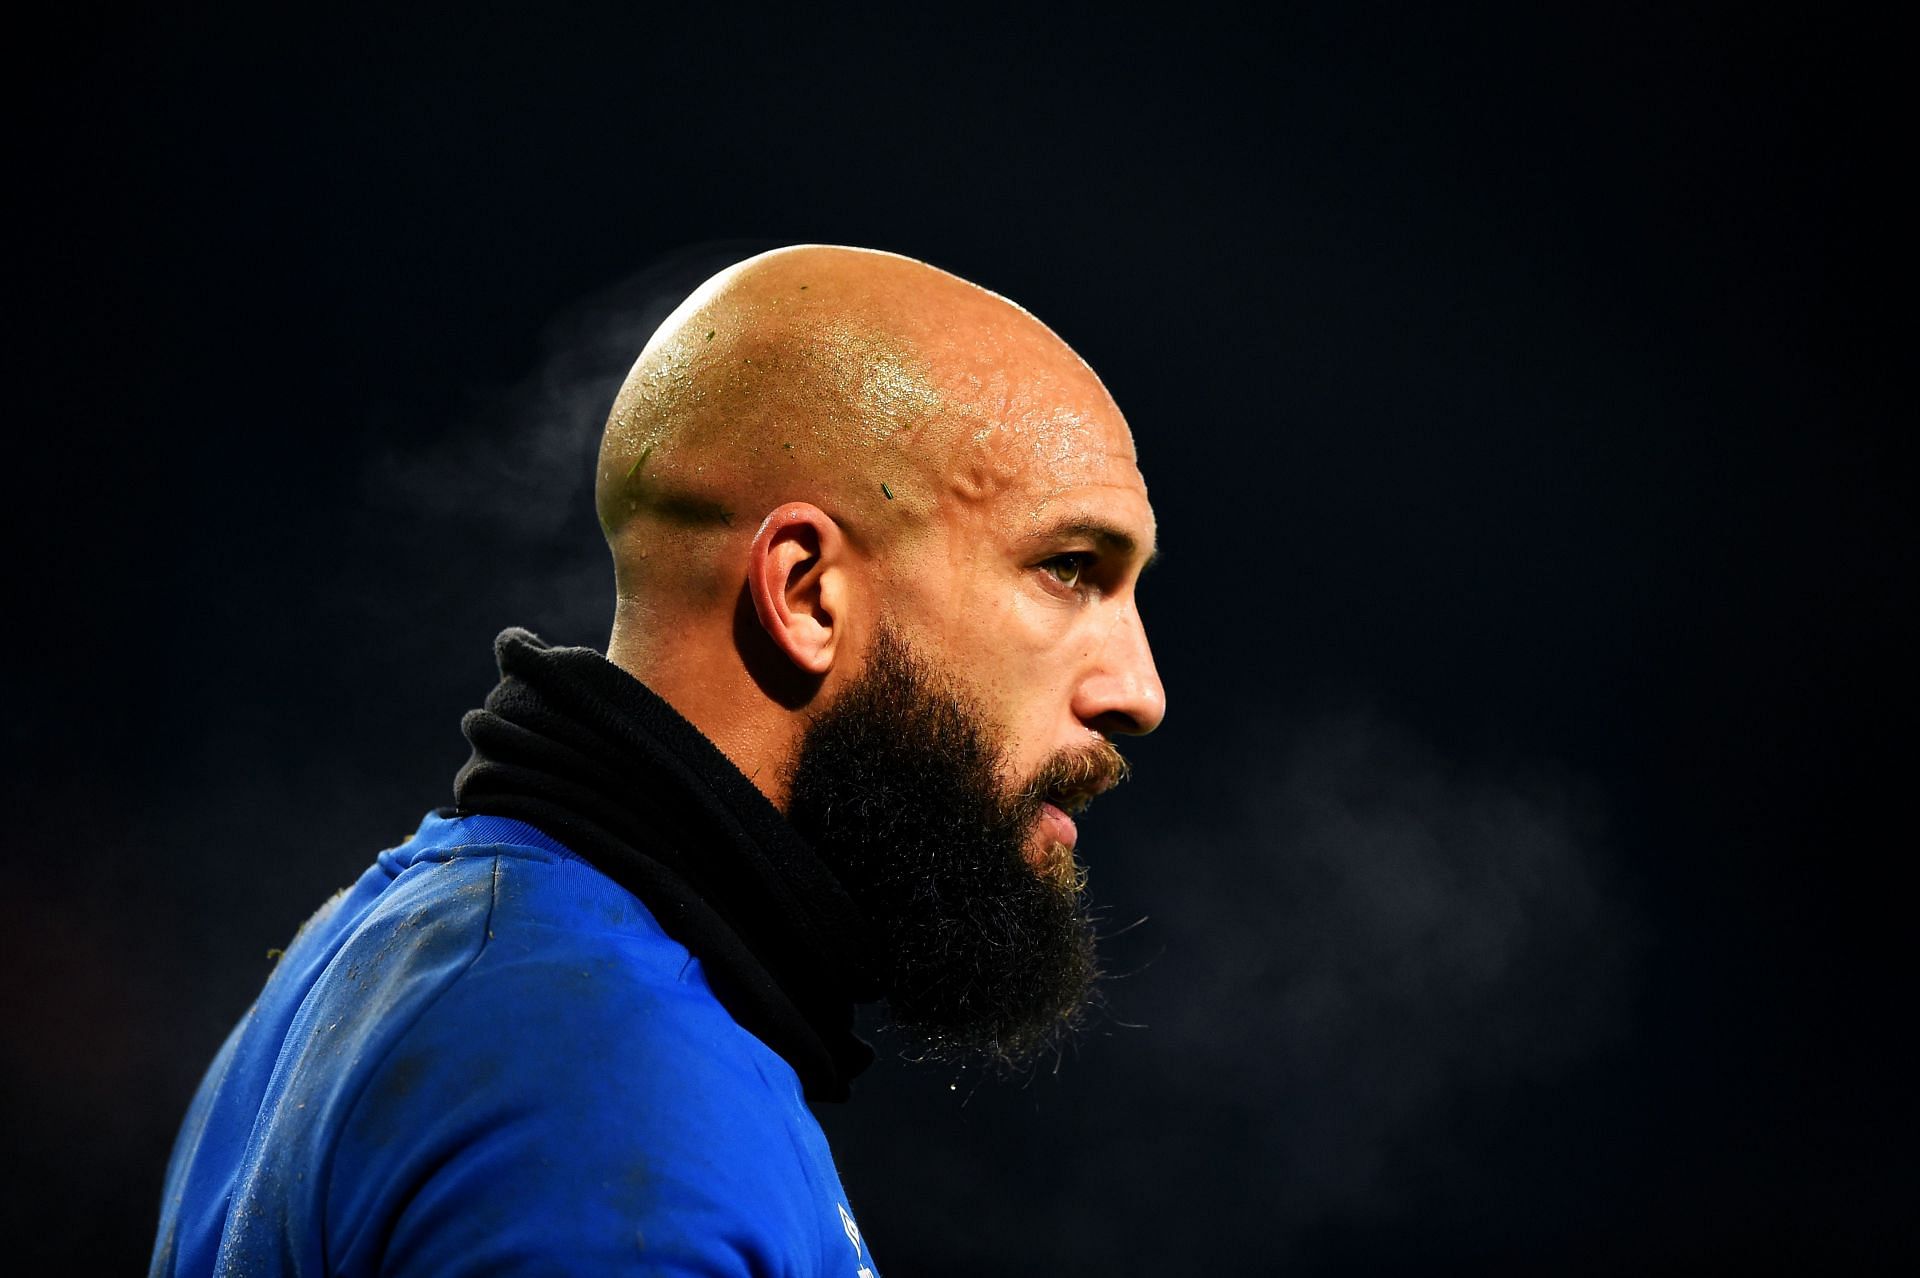 Tim Howard had a better spell at Everton than Manchester United Fabien Barthez of Manchester United